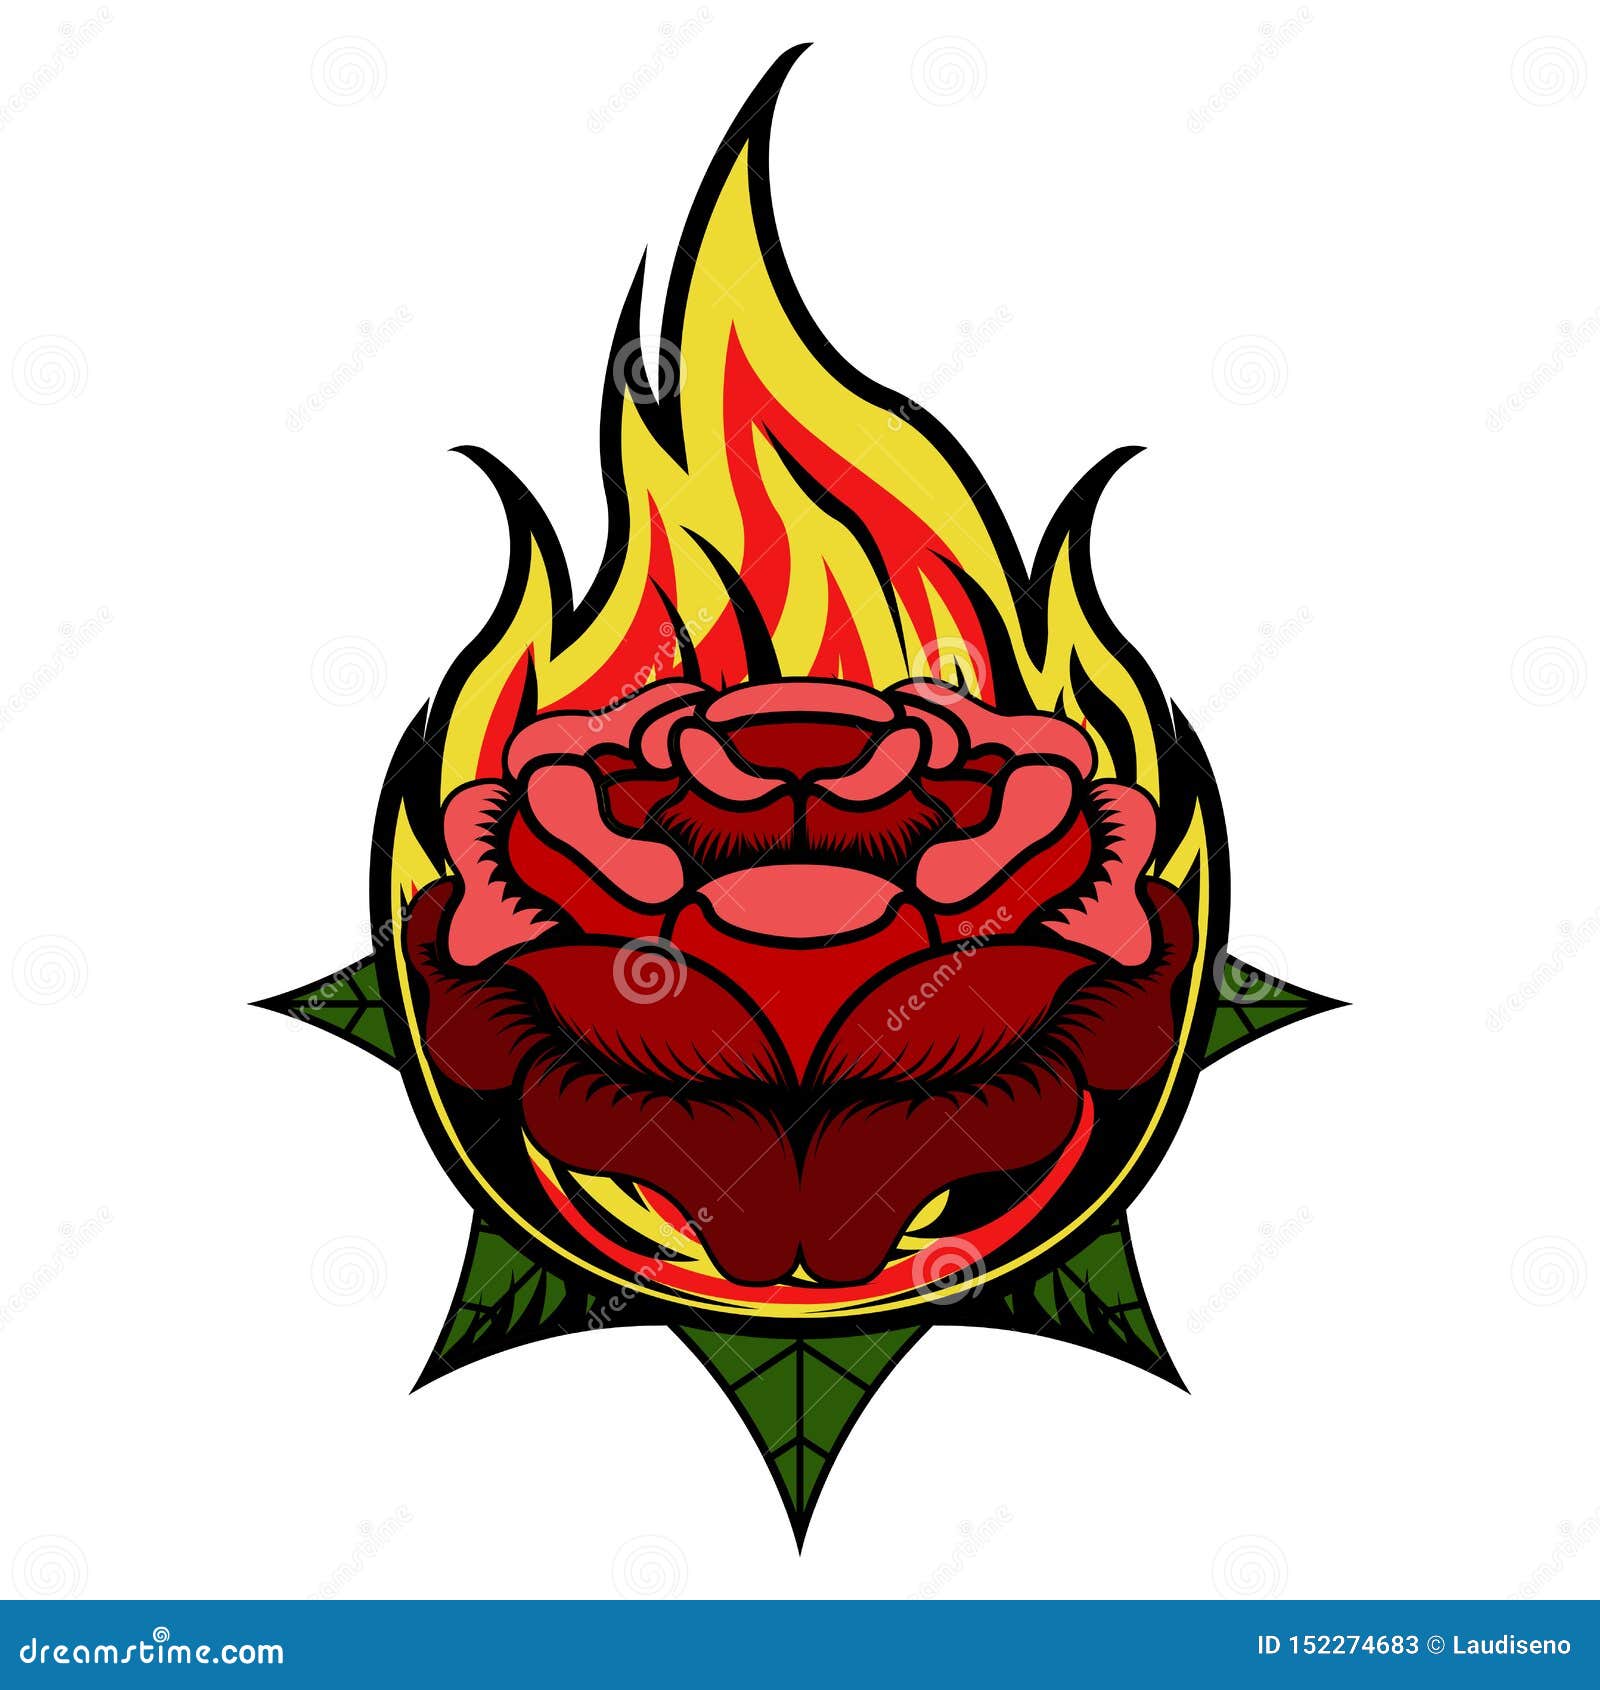 Knife and burning rose tattoo  Tattoogridnet